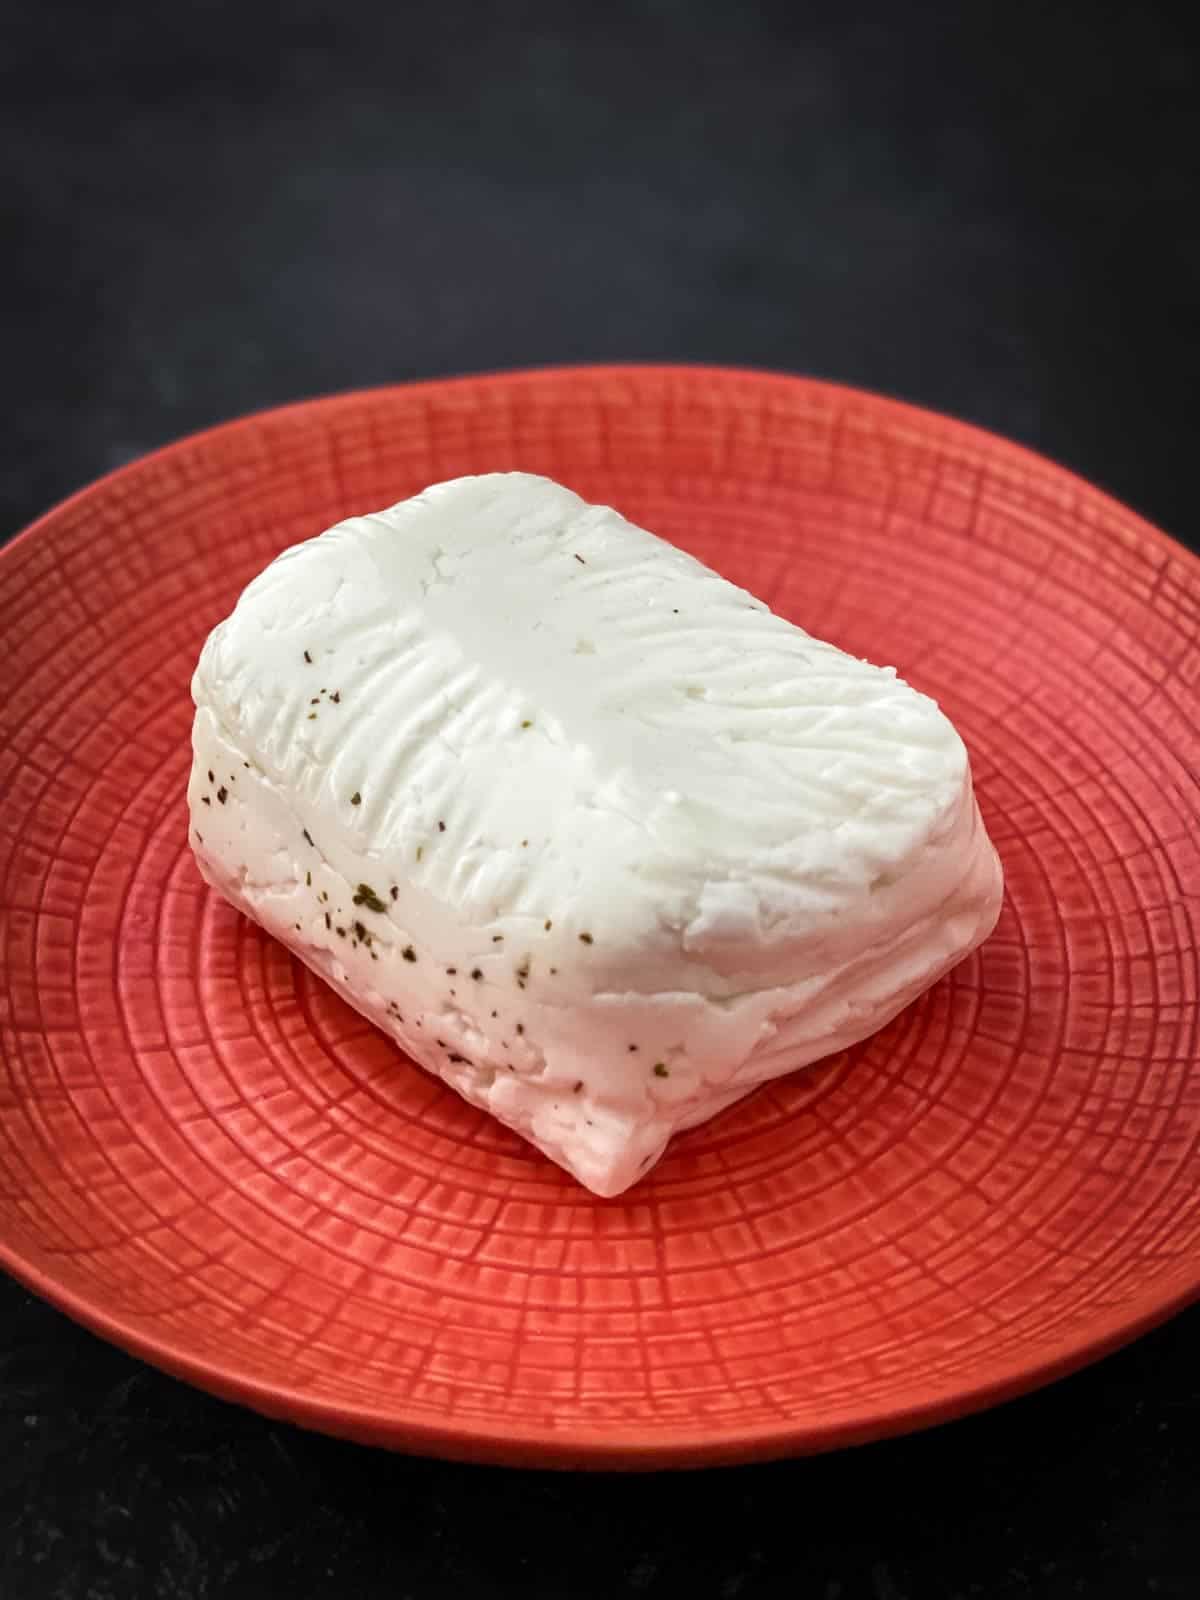 block of halloumi cheese on a red textured plate